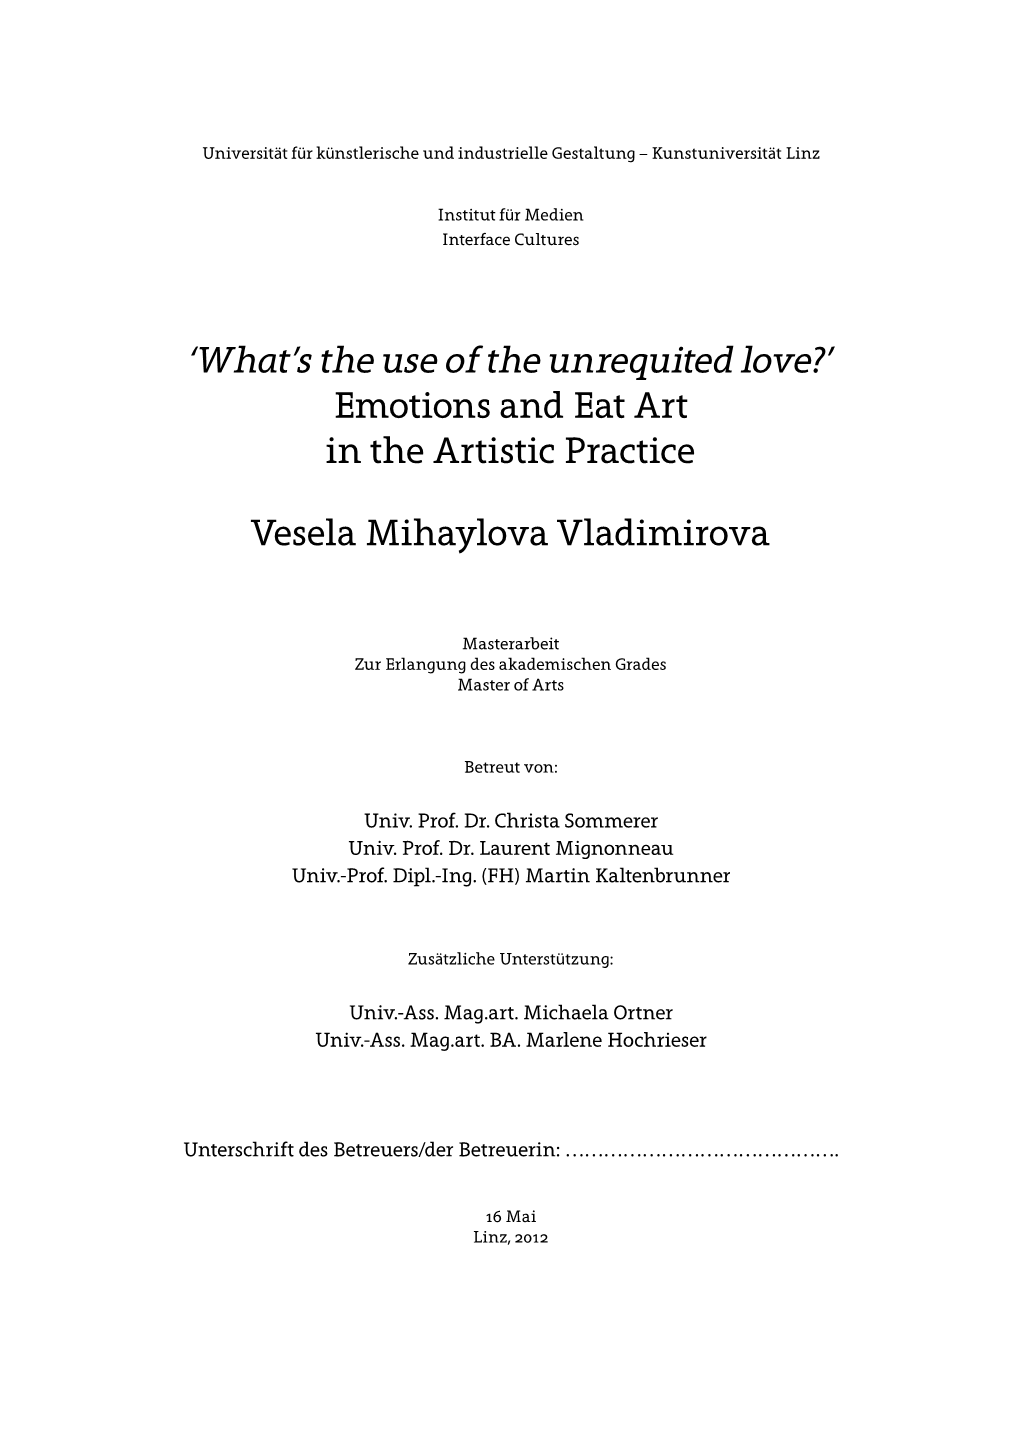 'What's the Use of the Unrequited Love?' Emotions and Eat Art in The